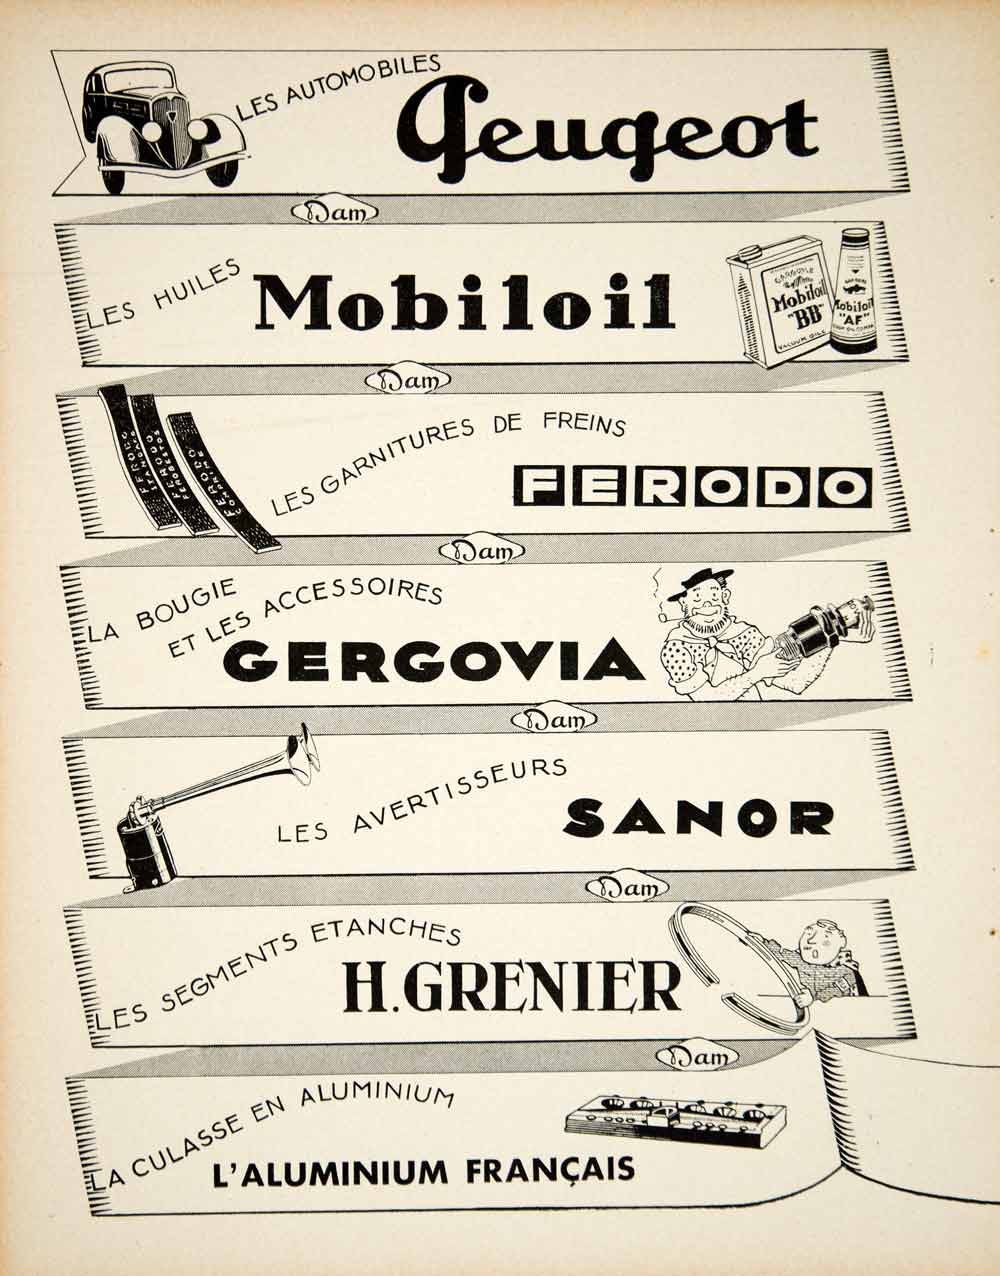 1935 Ad Damour Publicite French Advertising Peugeot Mobiloil Car Products VEN9